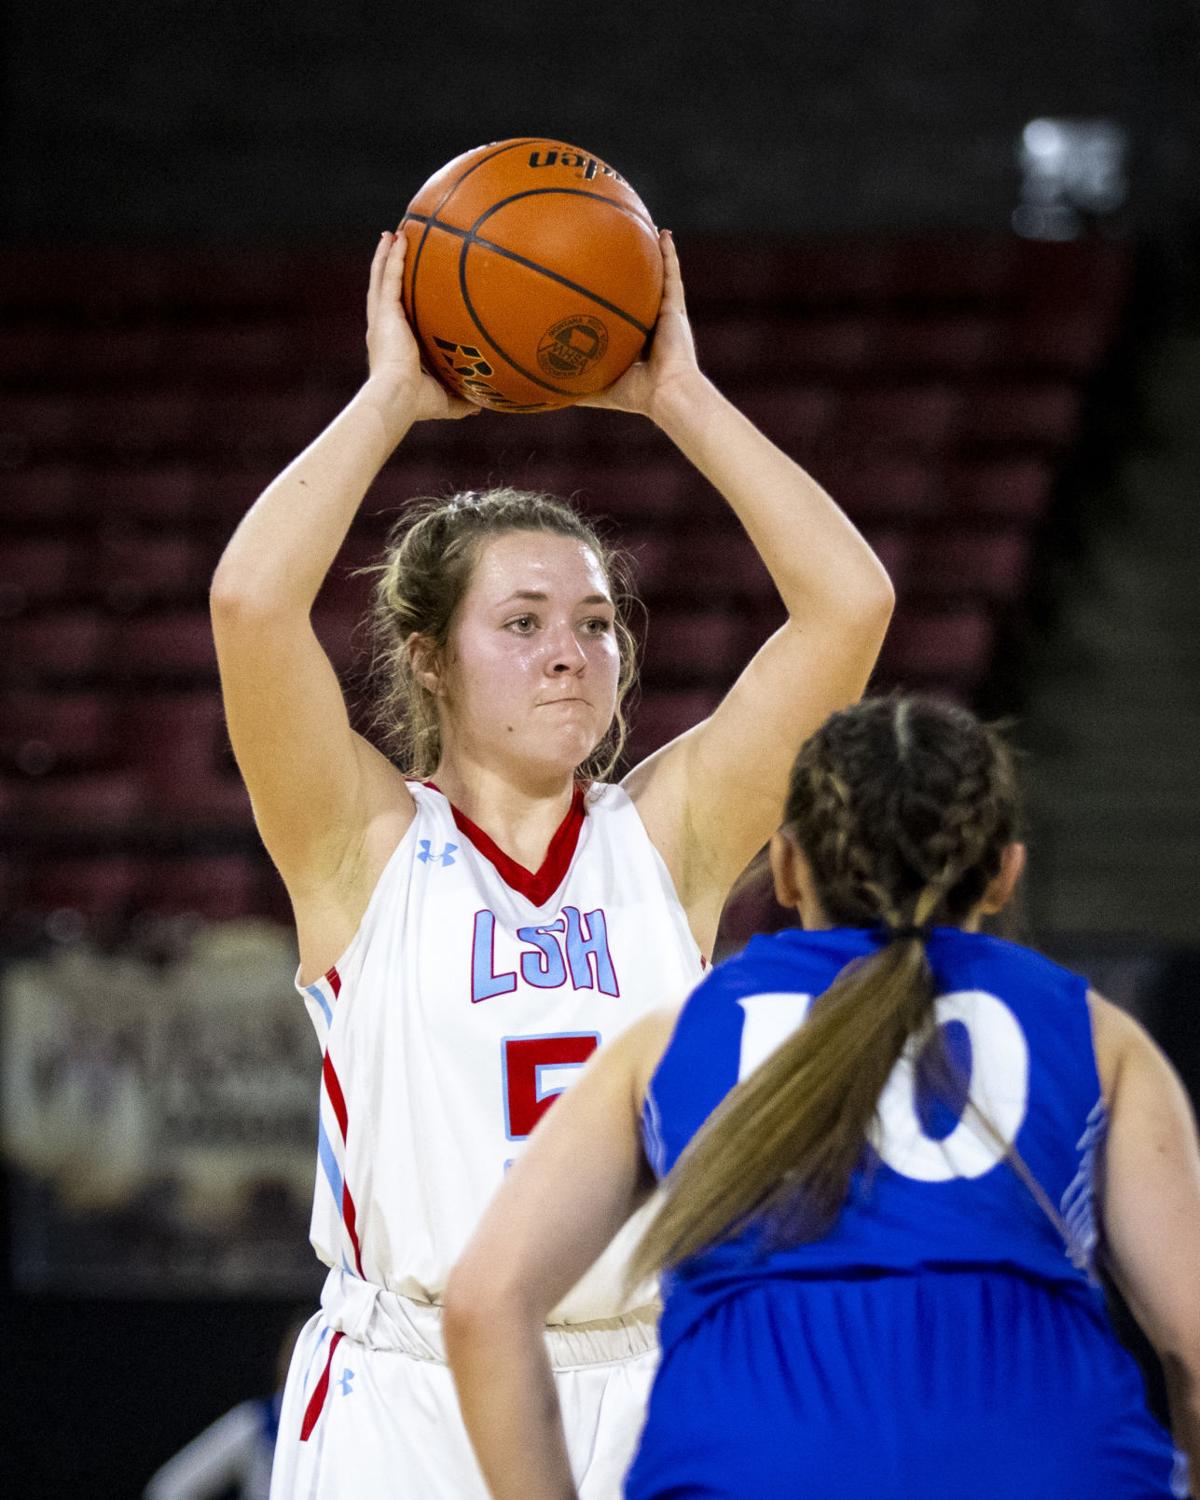 State B girls basketball: No. 1 Big Timber, No. 4 Malta to face off in semifinals | Girls ...